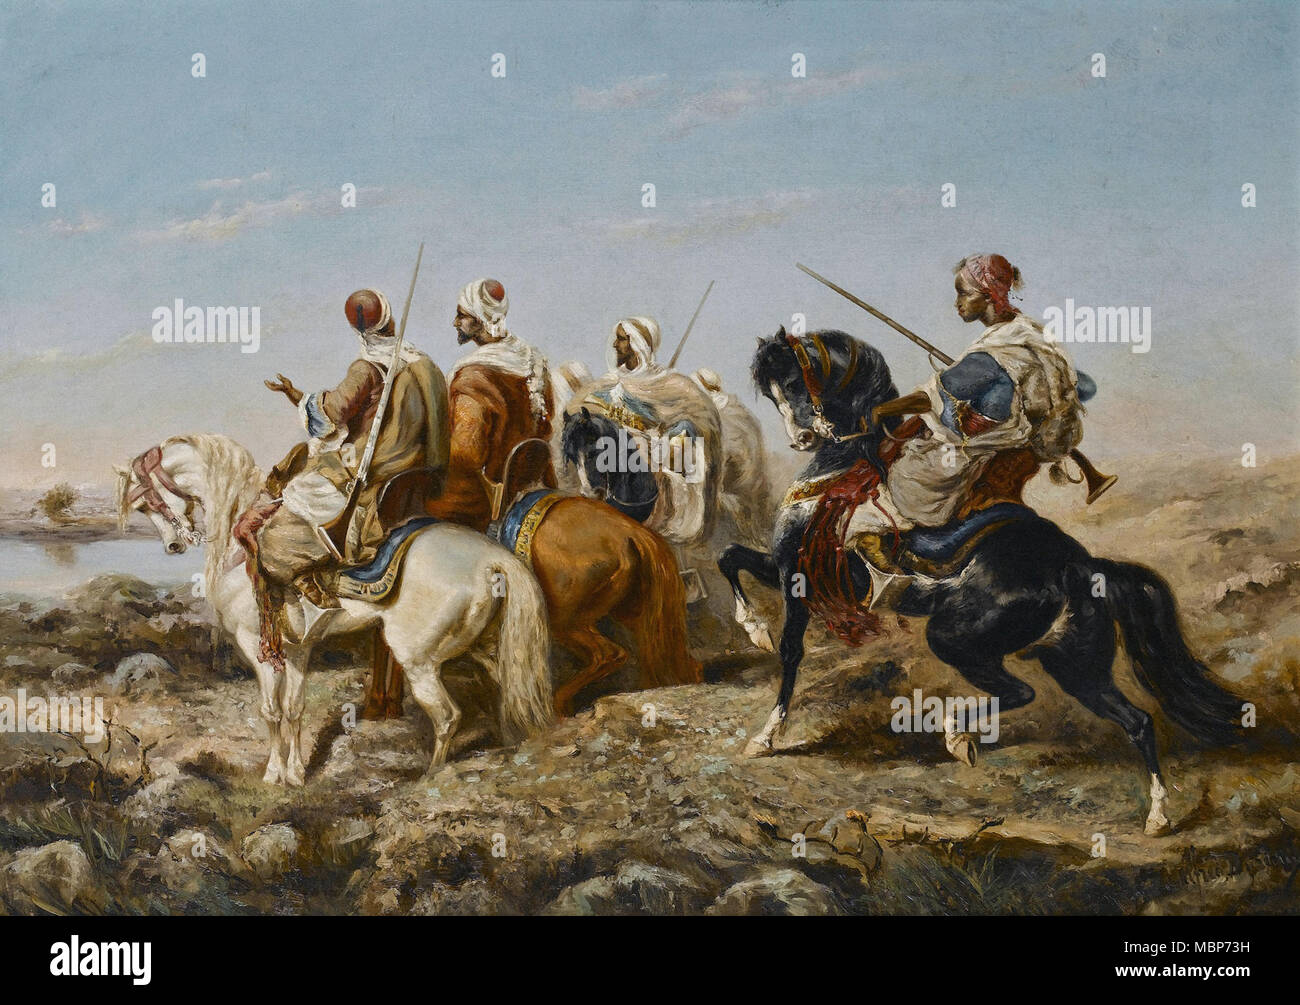 Durieux Alfred - Arab Horsemen Approaching a River Stock Photo